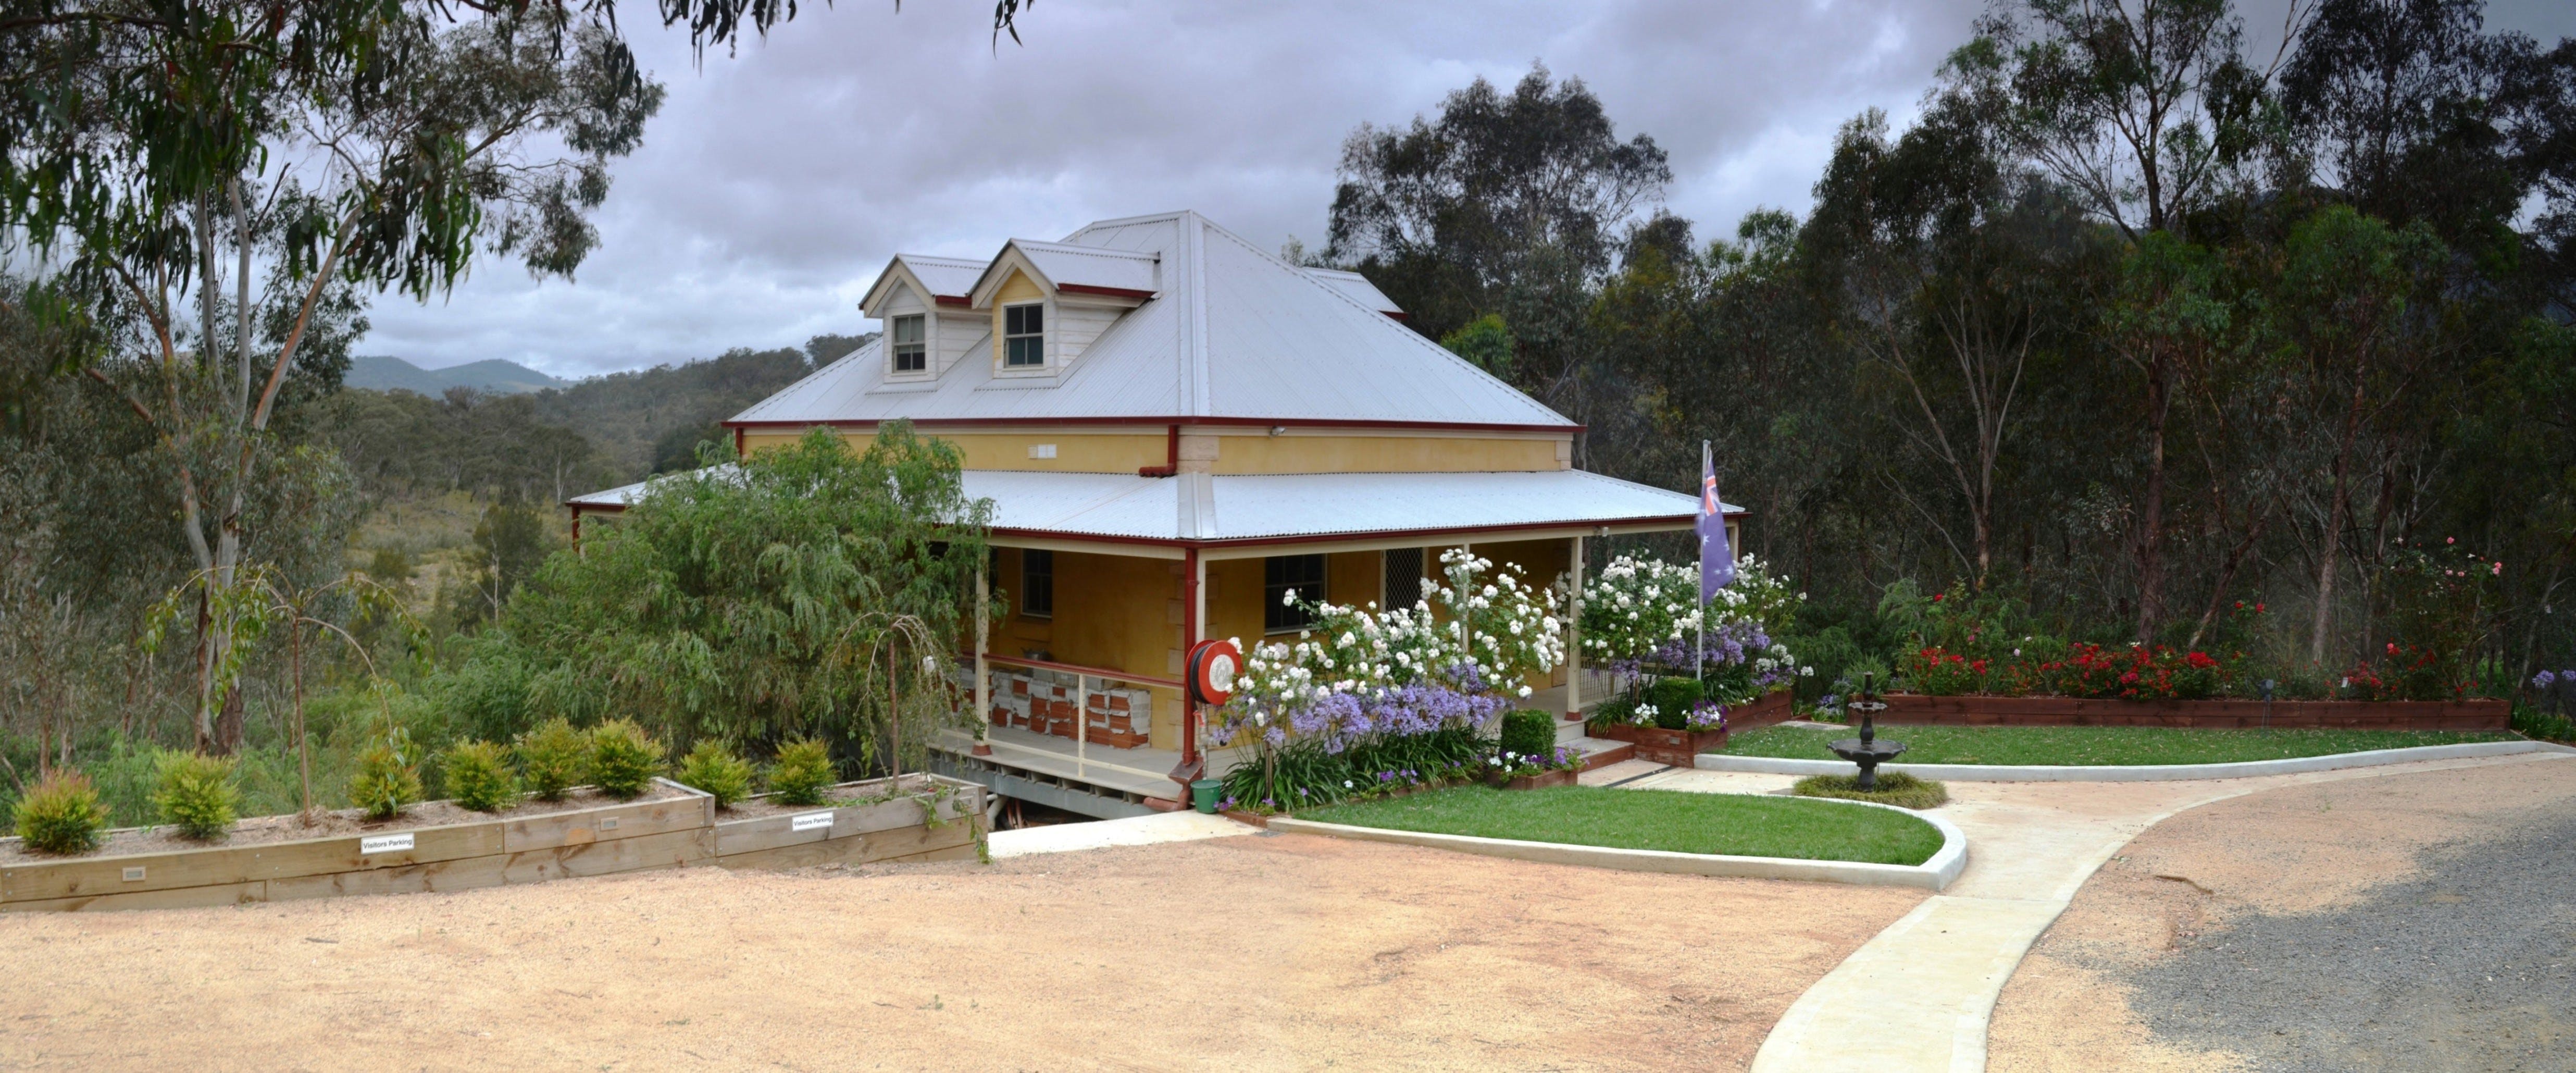 Tanwarra Lodge Bed and Breakfast - Grafton Accommodation